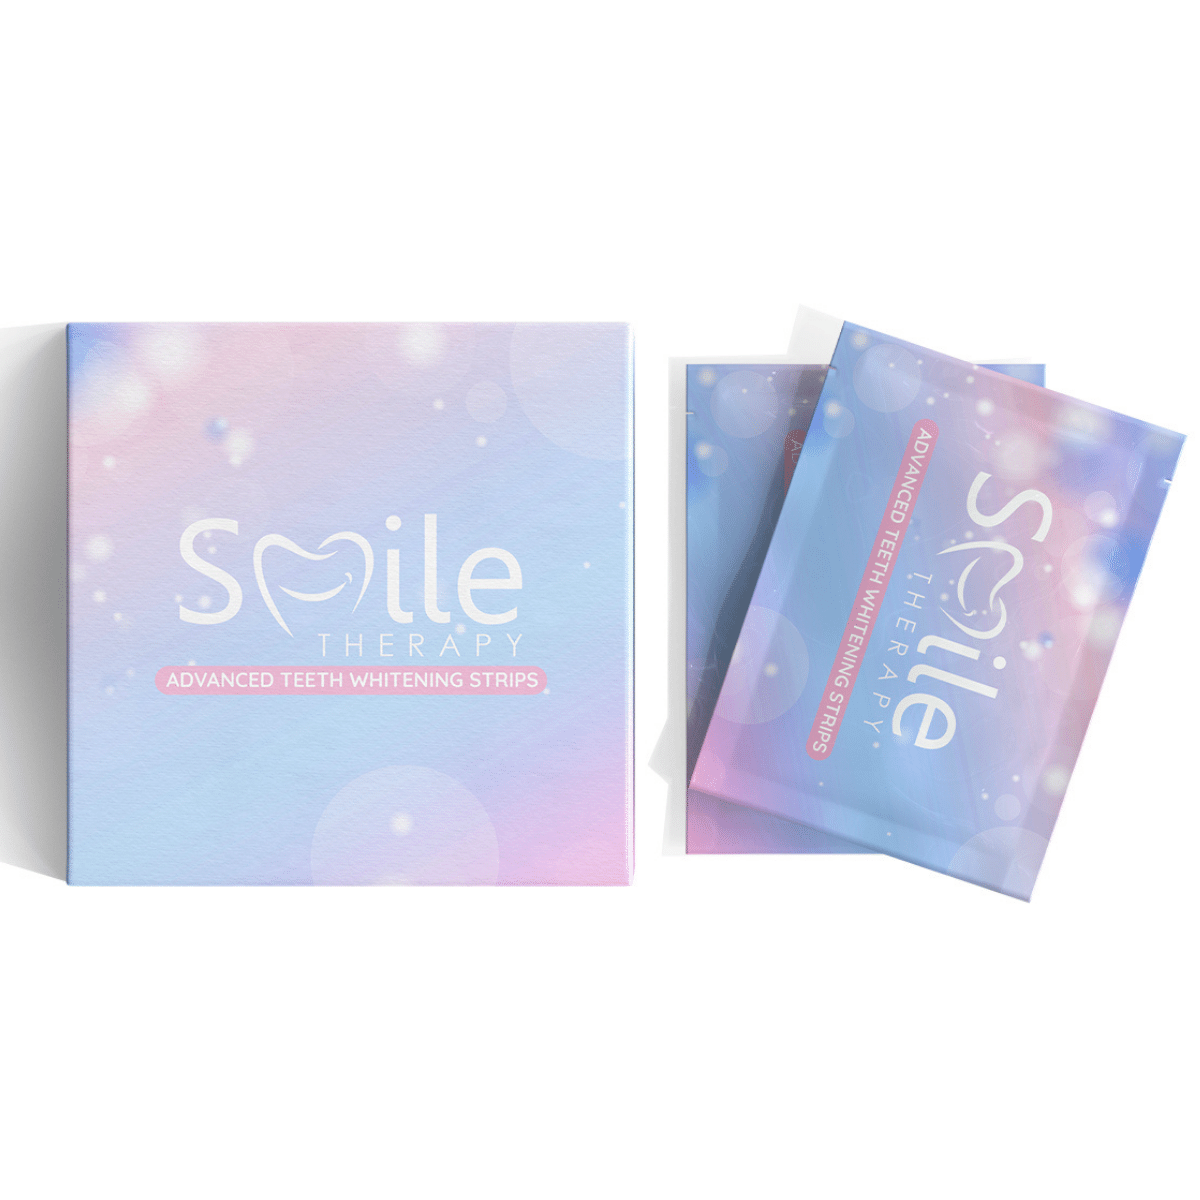 Advanced Teeth Whitening & Cleaning Strips (14 Treatments) - Smile Therapy